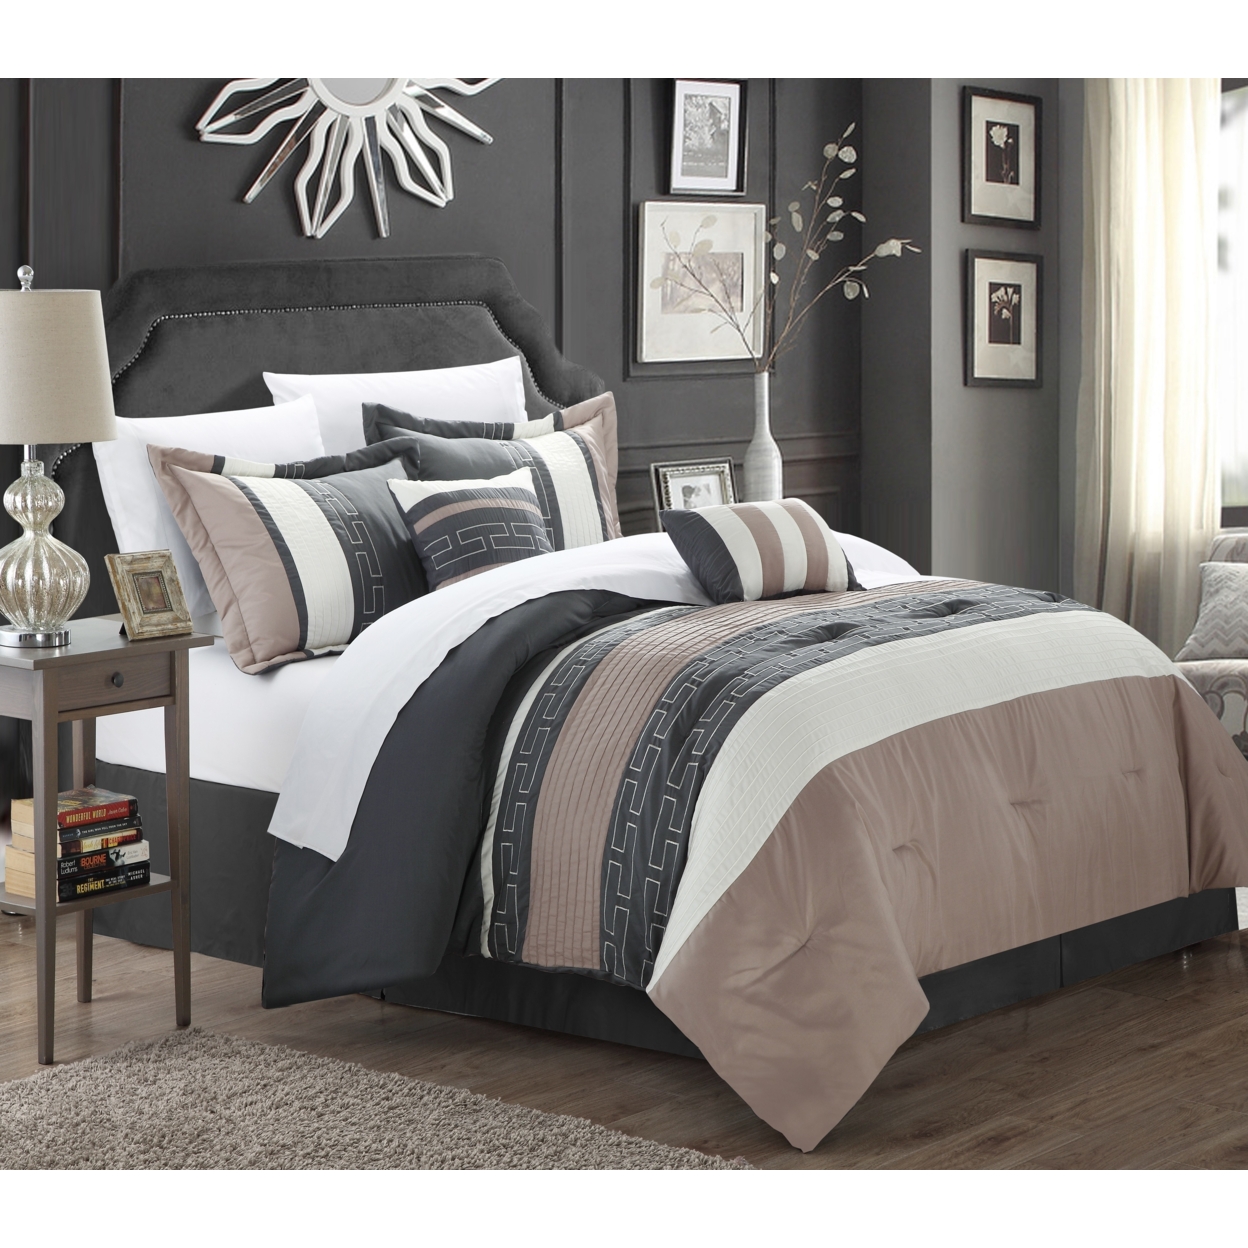 Chic Home Coralie 6-piece Comforter Set Hotel Collection - Taupe, King